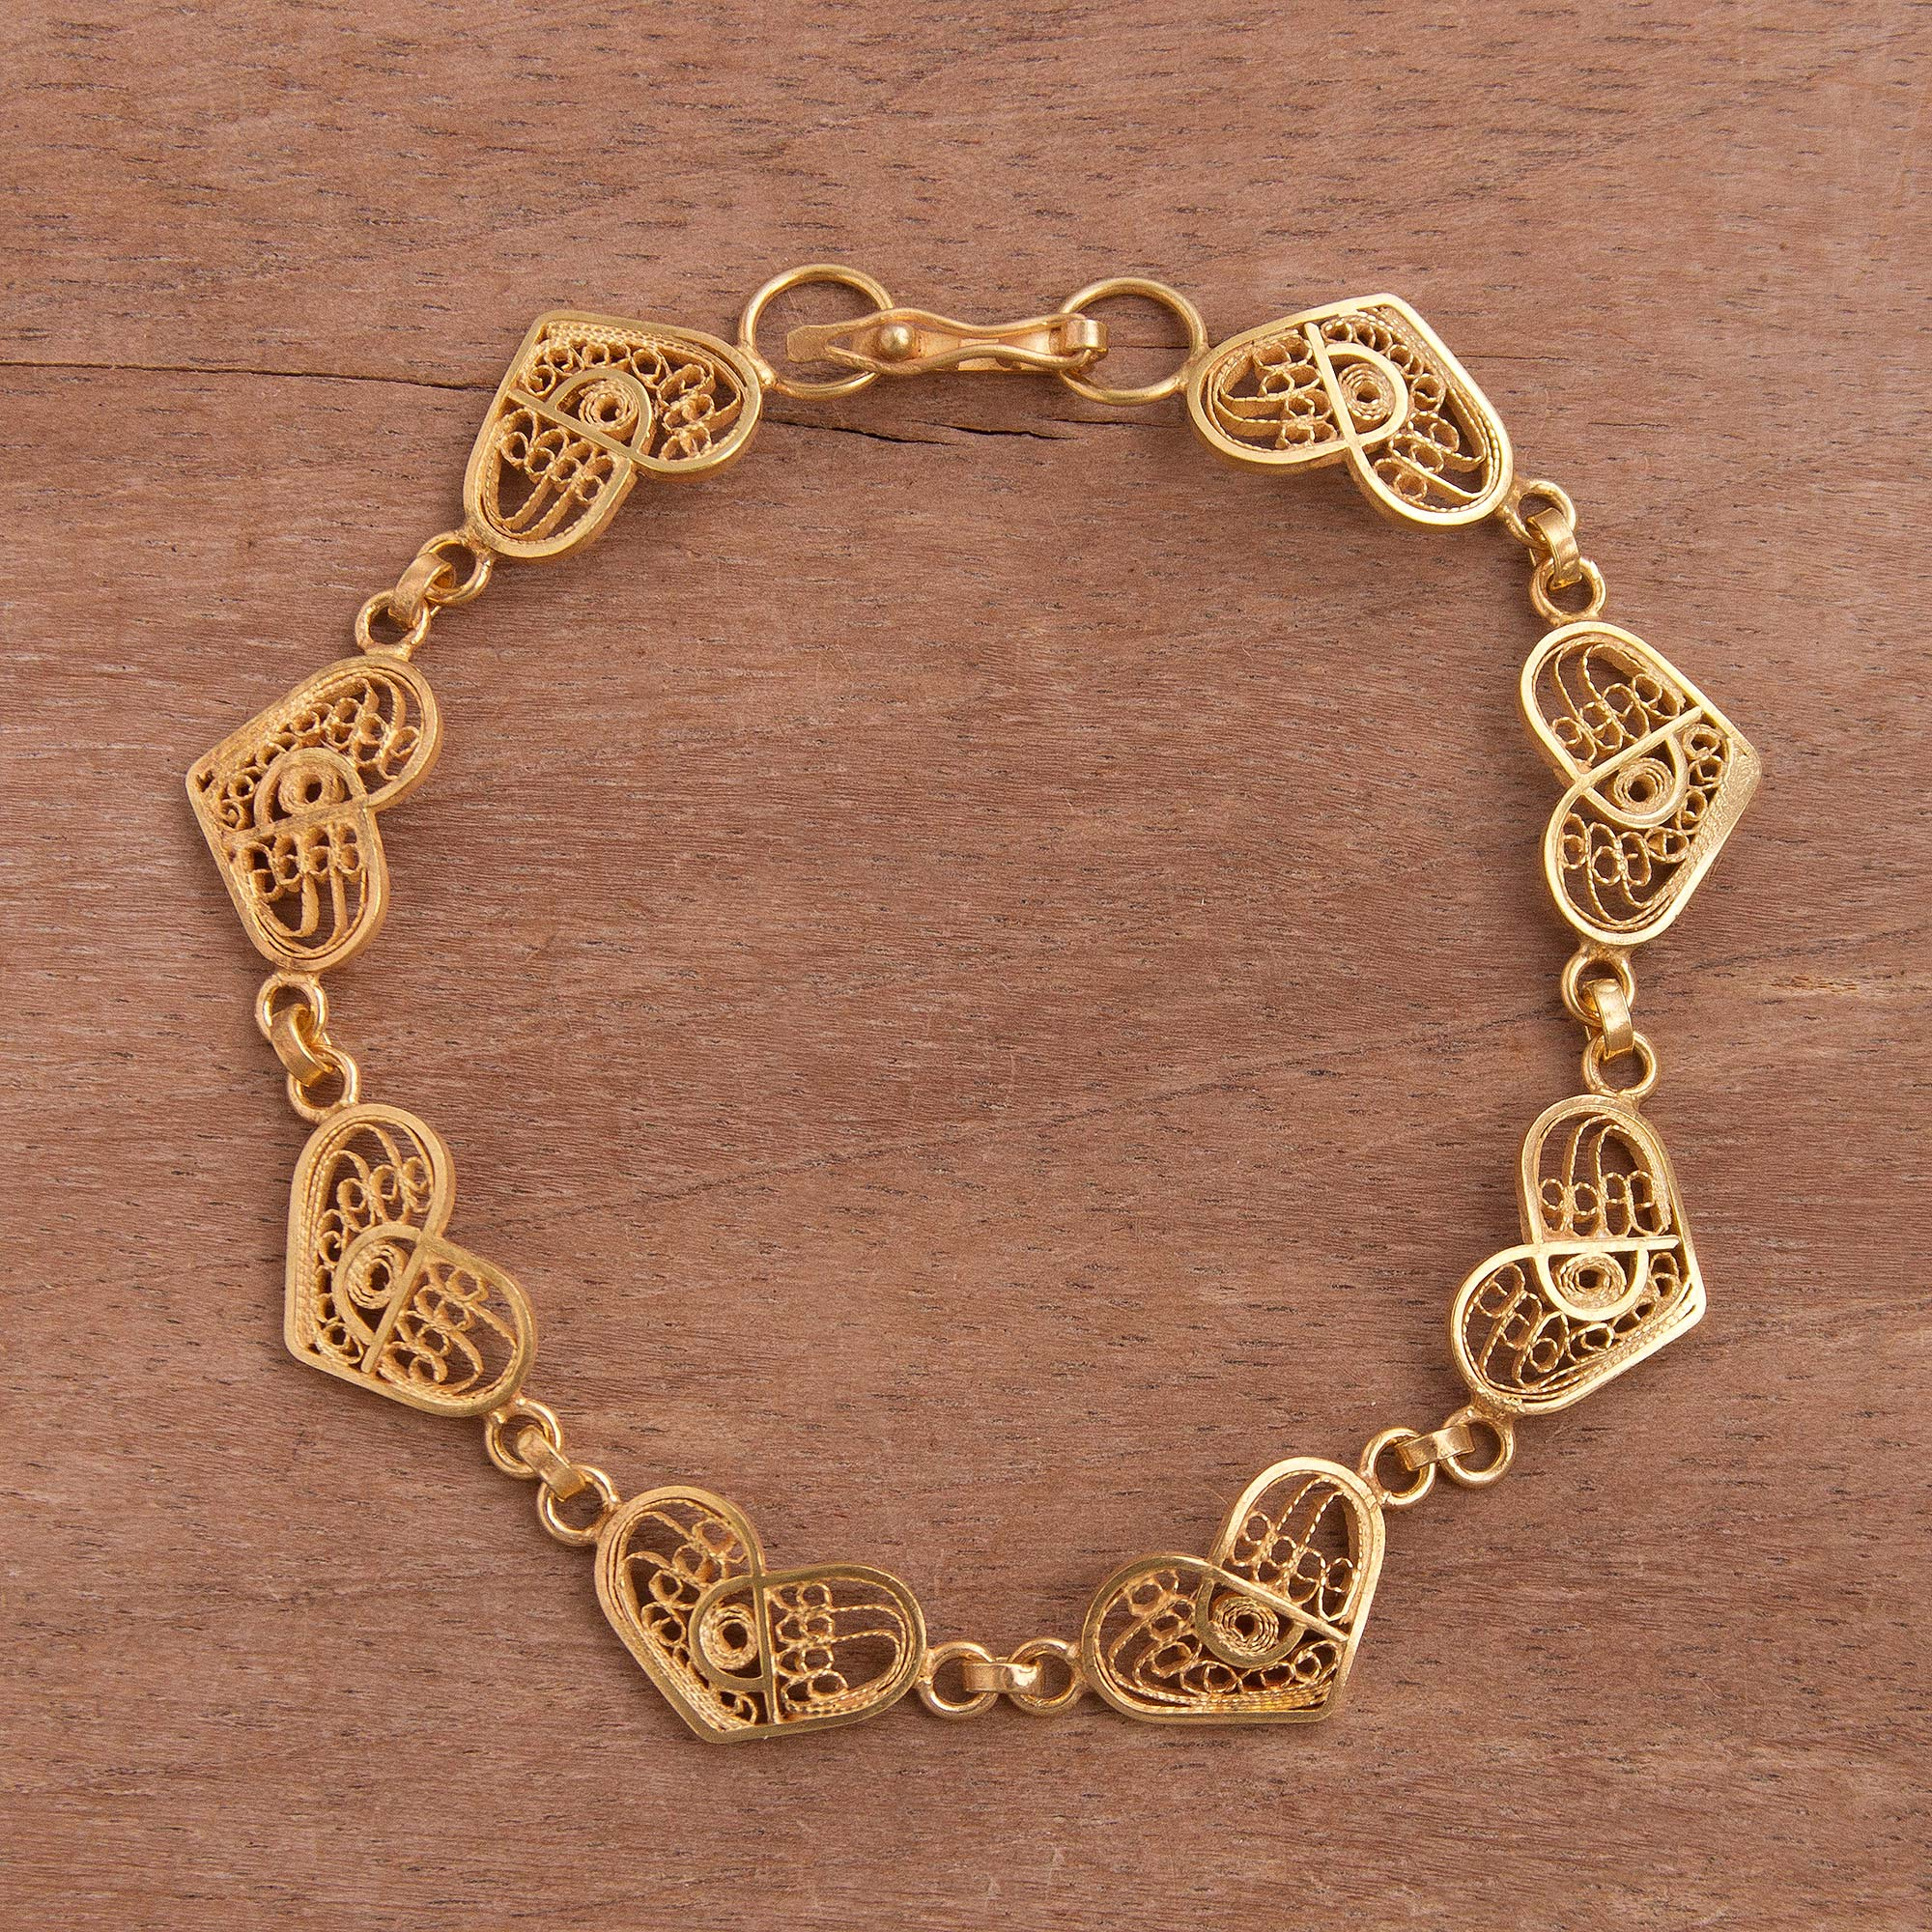 Just A Little Heart Gold Plated Sterling Silver Chain Bracelet